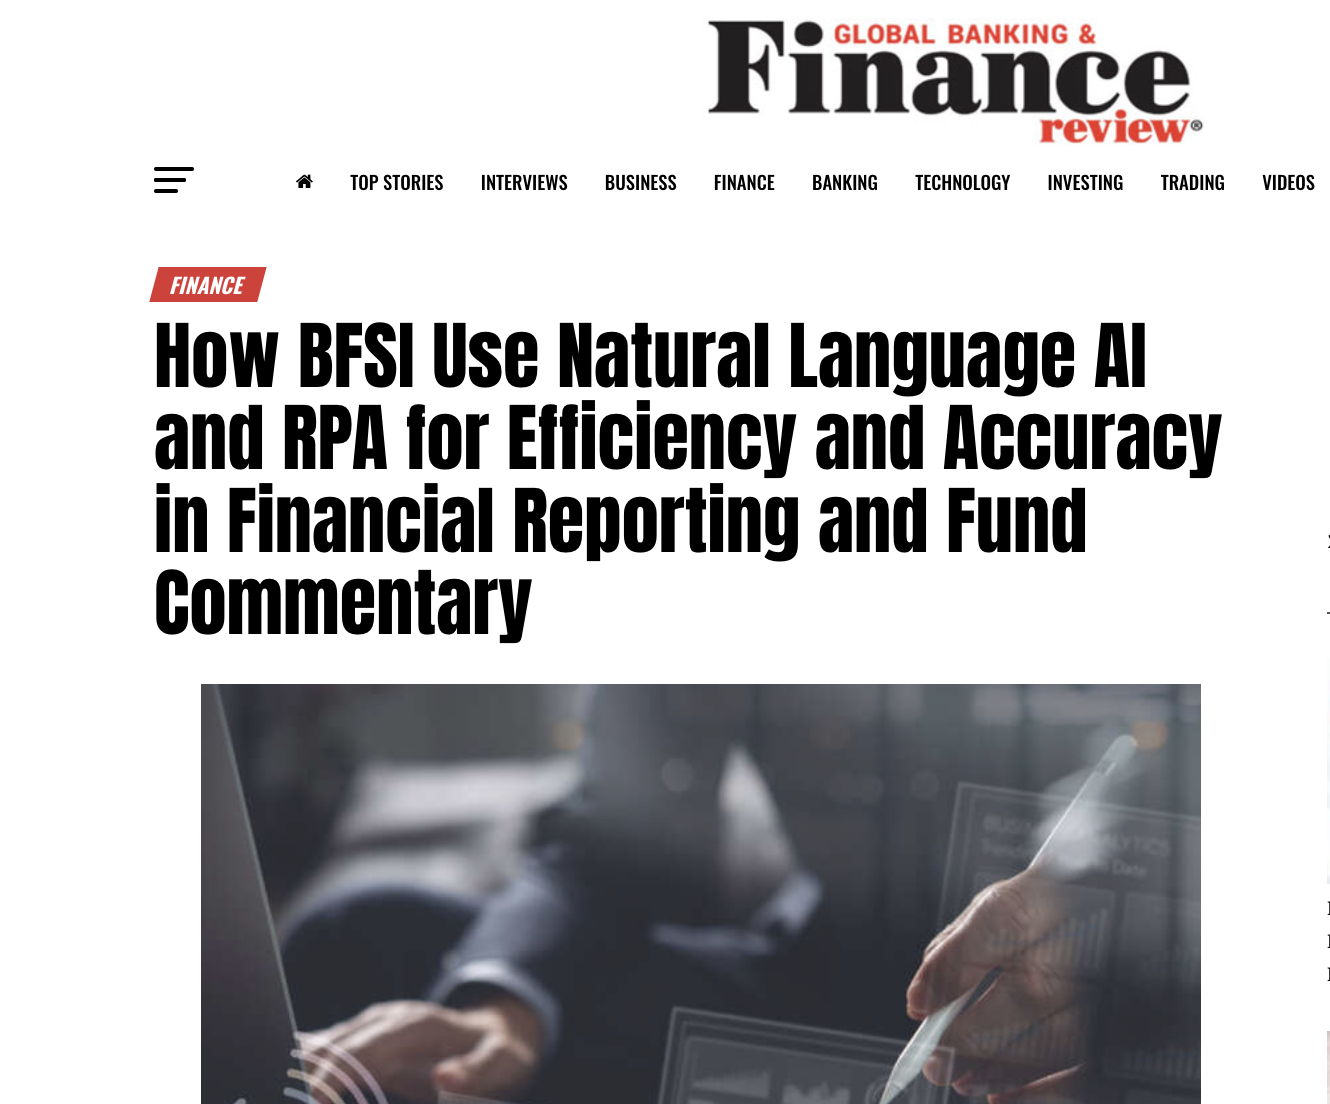 How BFSI Use Natural Language AI and RPA for Efficiency and Accuracy in Financial Reporting and Fund Commentary